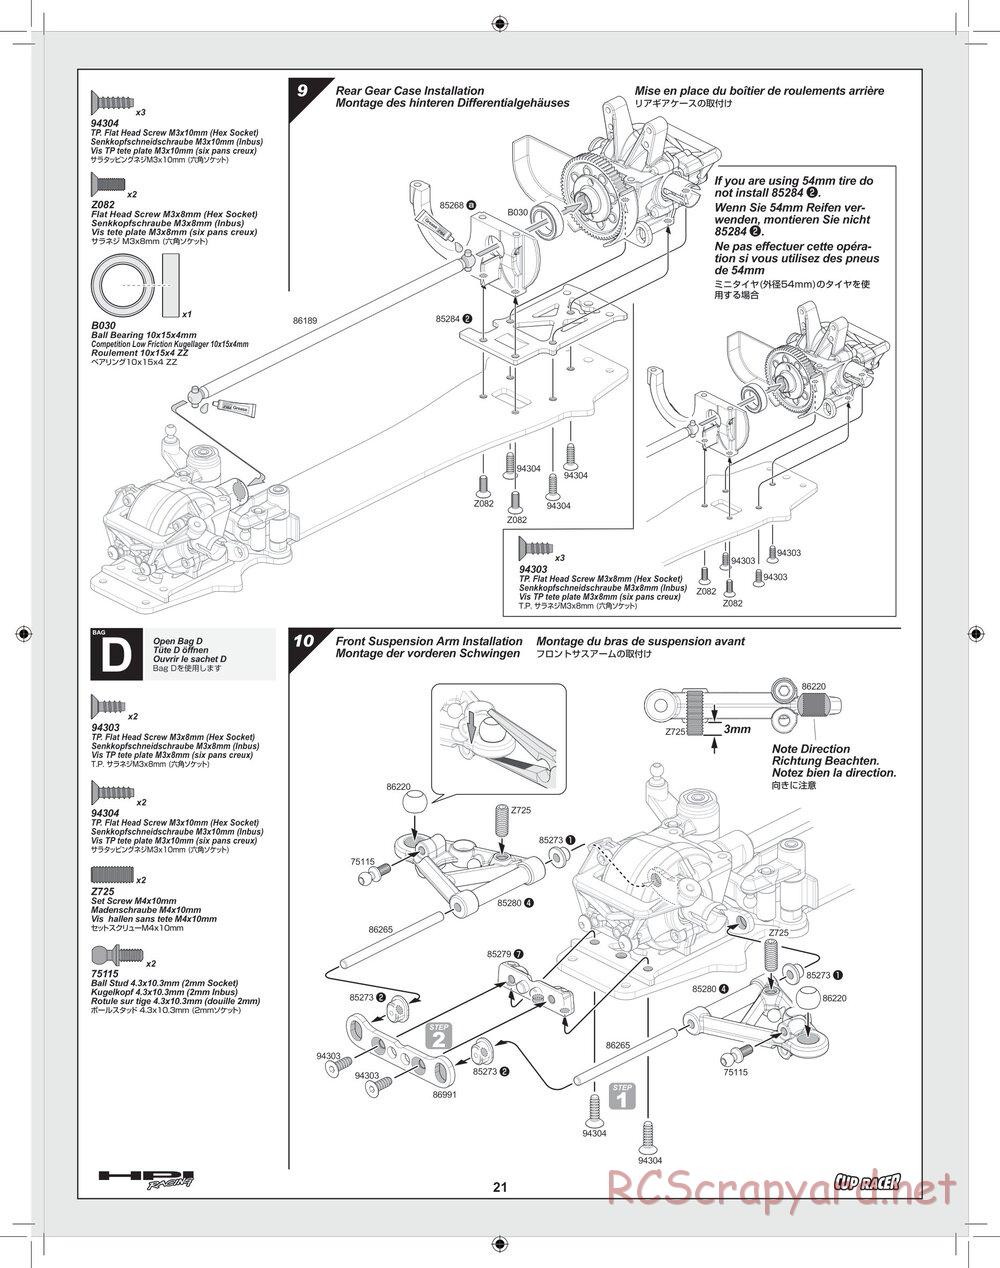 HPI - Cup Racer - Manual - Page 21